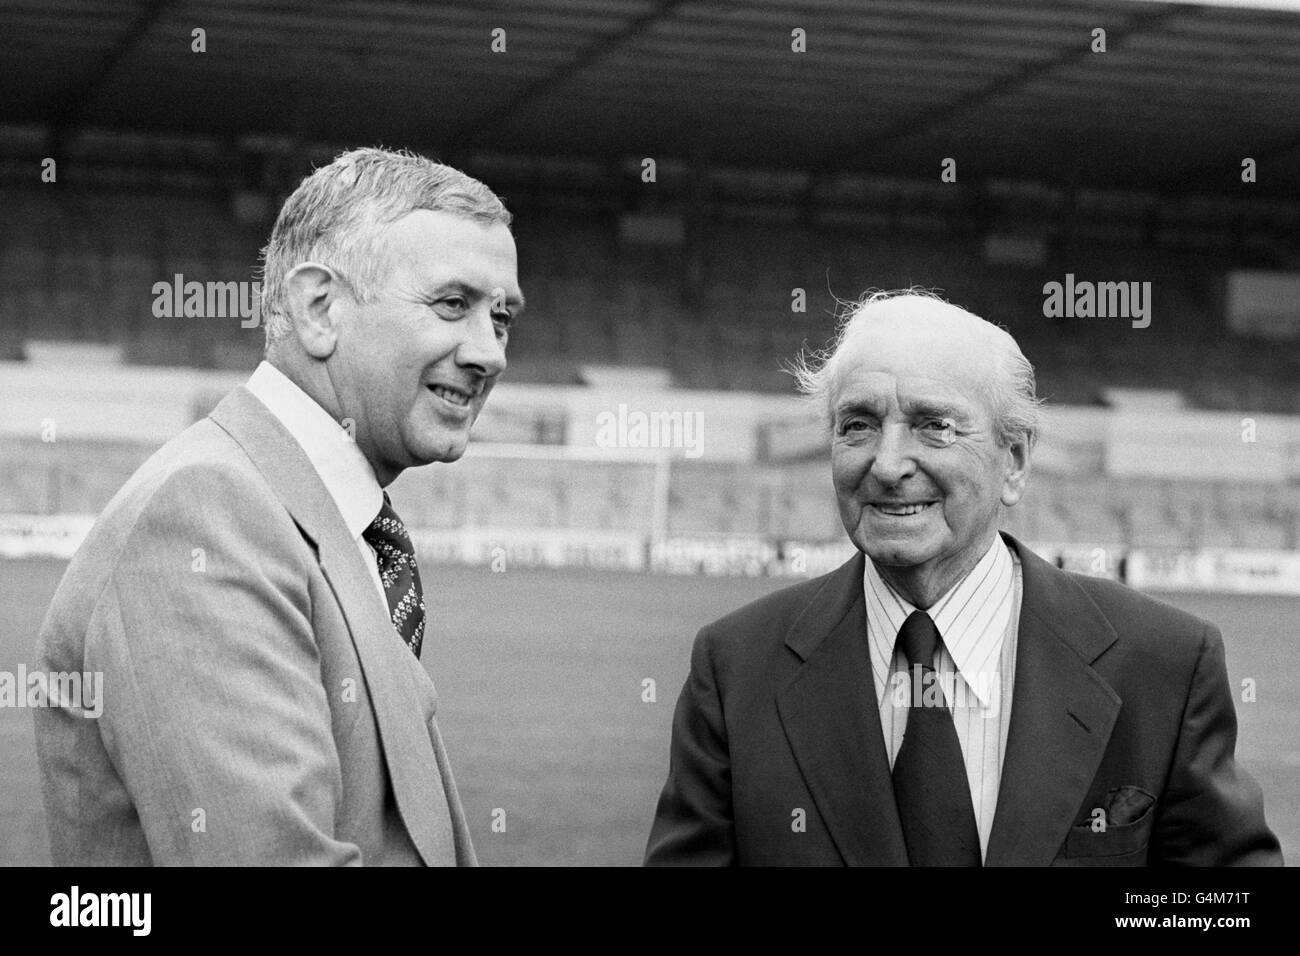 Current Sunderland Manager Jimmy Adamson, who is not on contract at Sunderland, (l) at Elland road with Leeds United deputy chairman Bob Roberts (r) after being offered the post of Manager of Leeds United. If he takes up the offer he will become Leeds United's third manager this year. Jimmy Armfield was told that his contract was not being renewed and Jock Stein was then appointed but left after 45 days to become Scotland Manager. Stock Photo